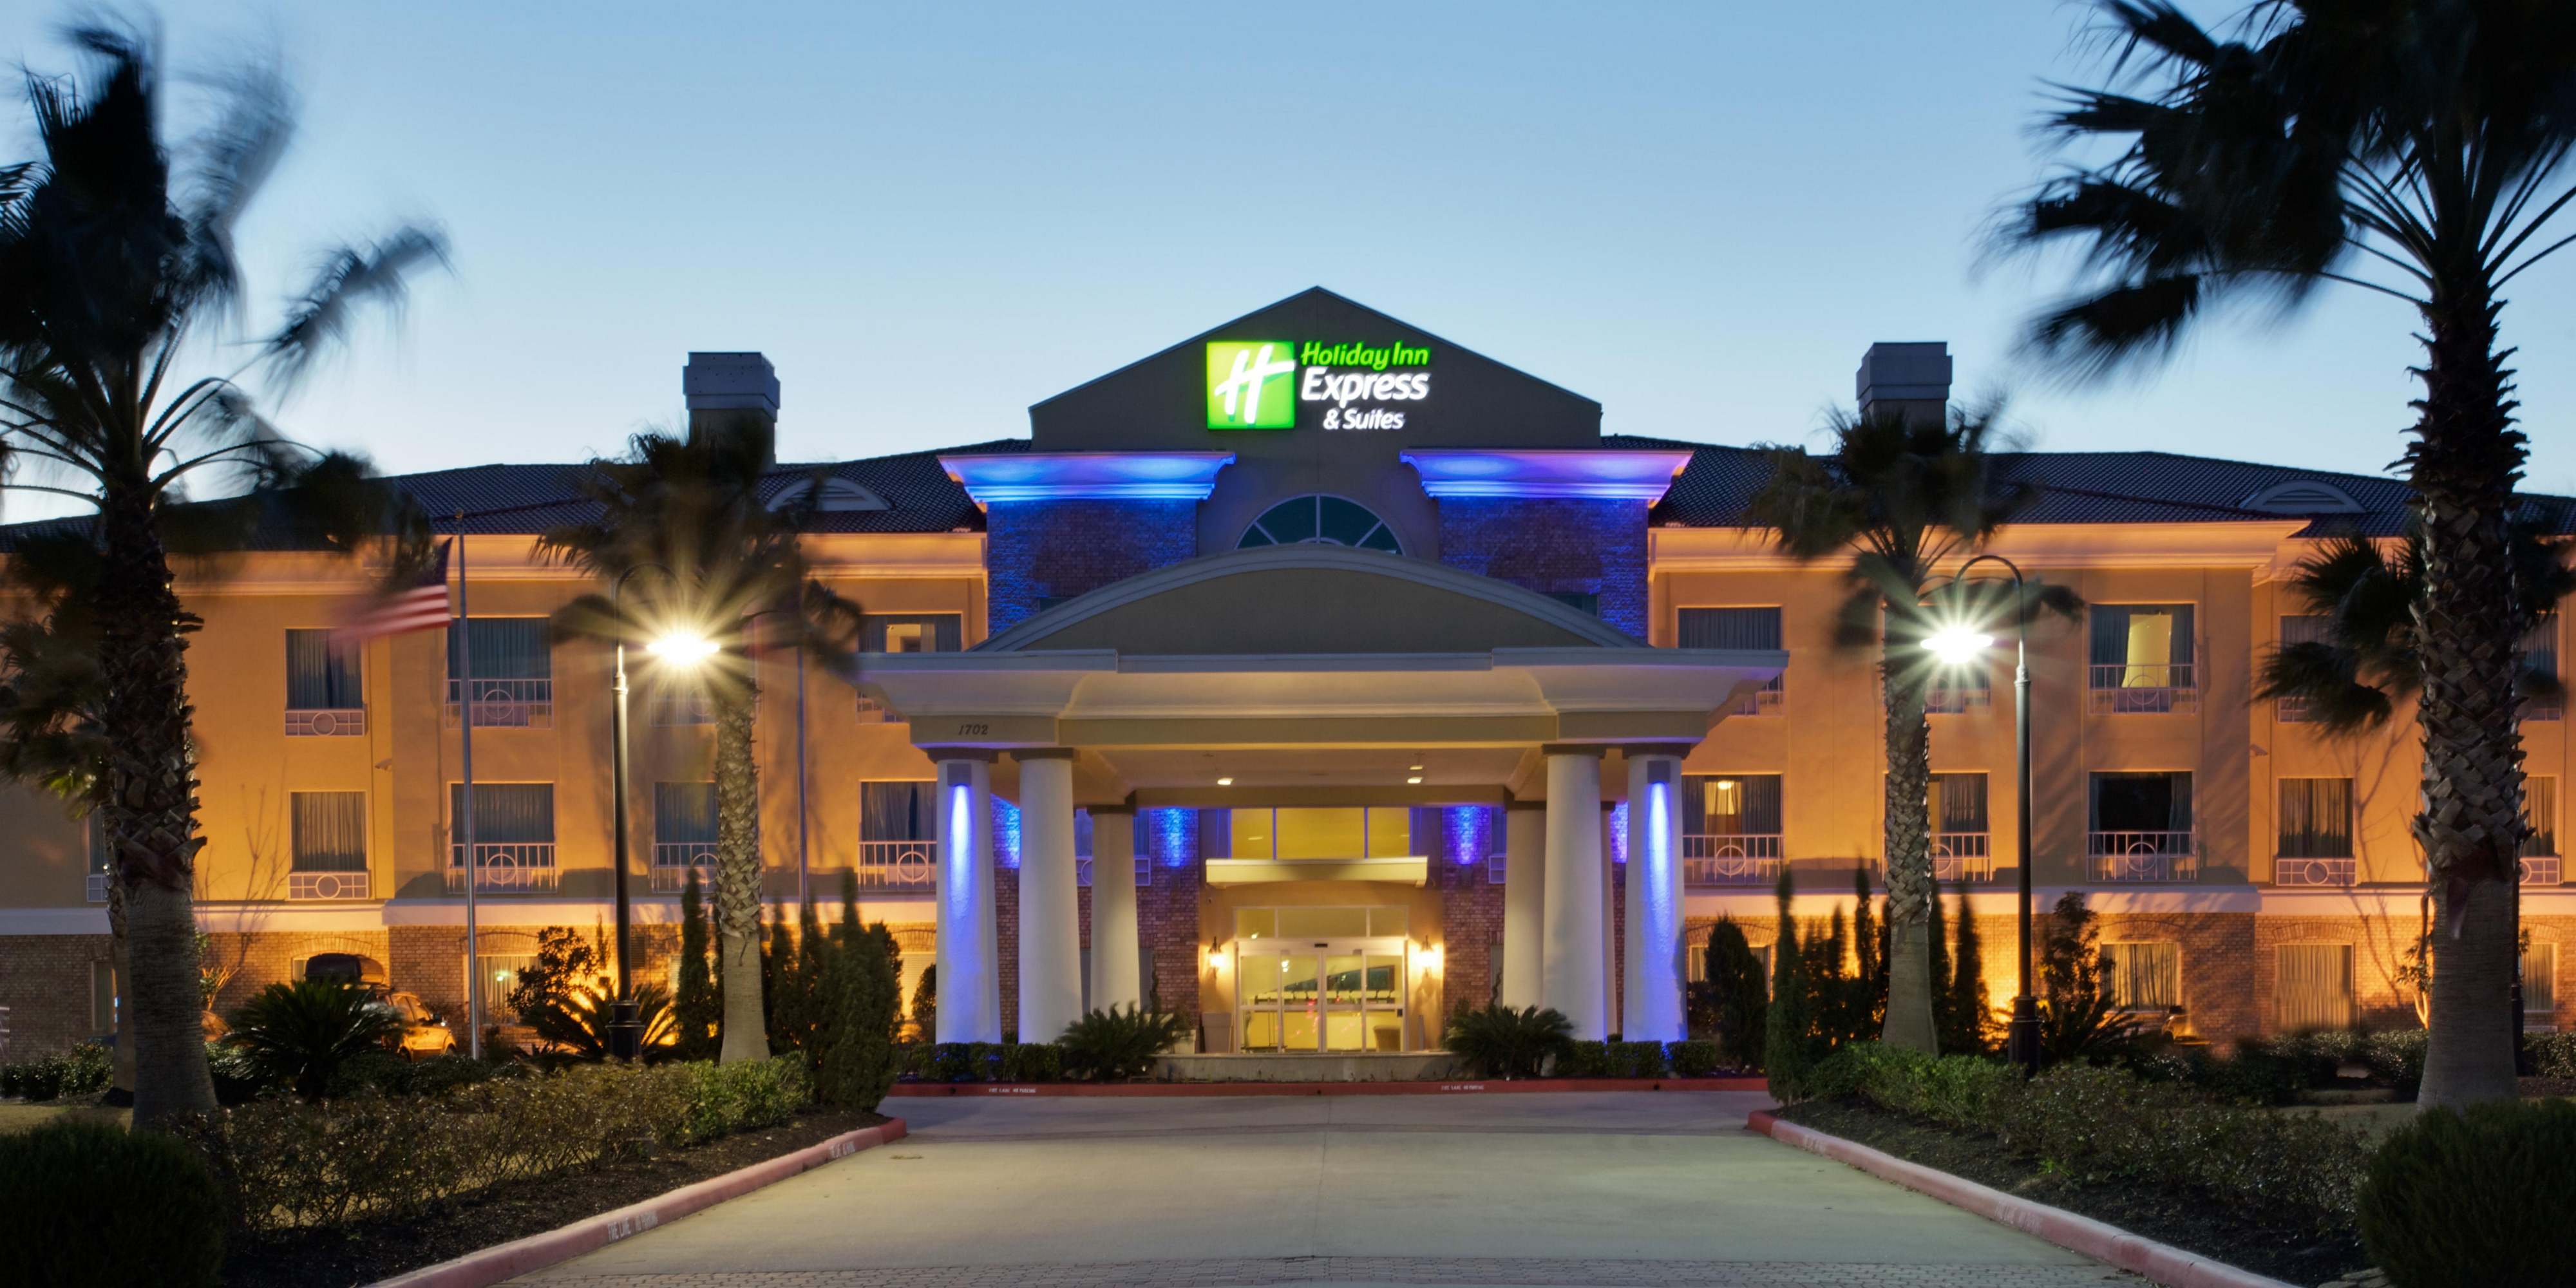 Hotels In Pearland Tx